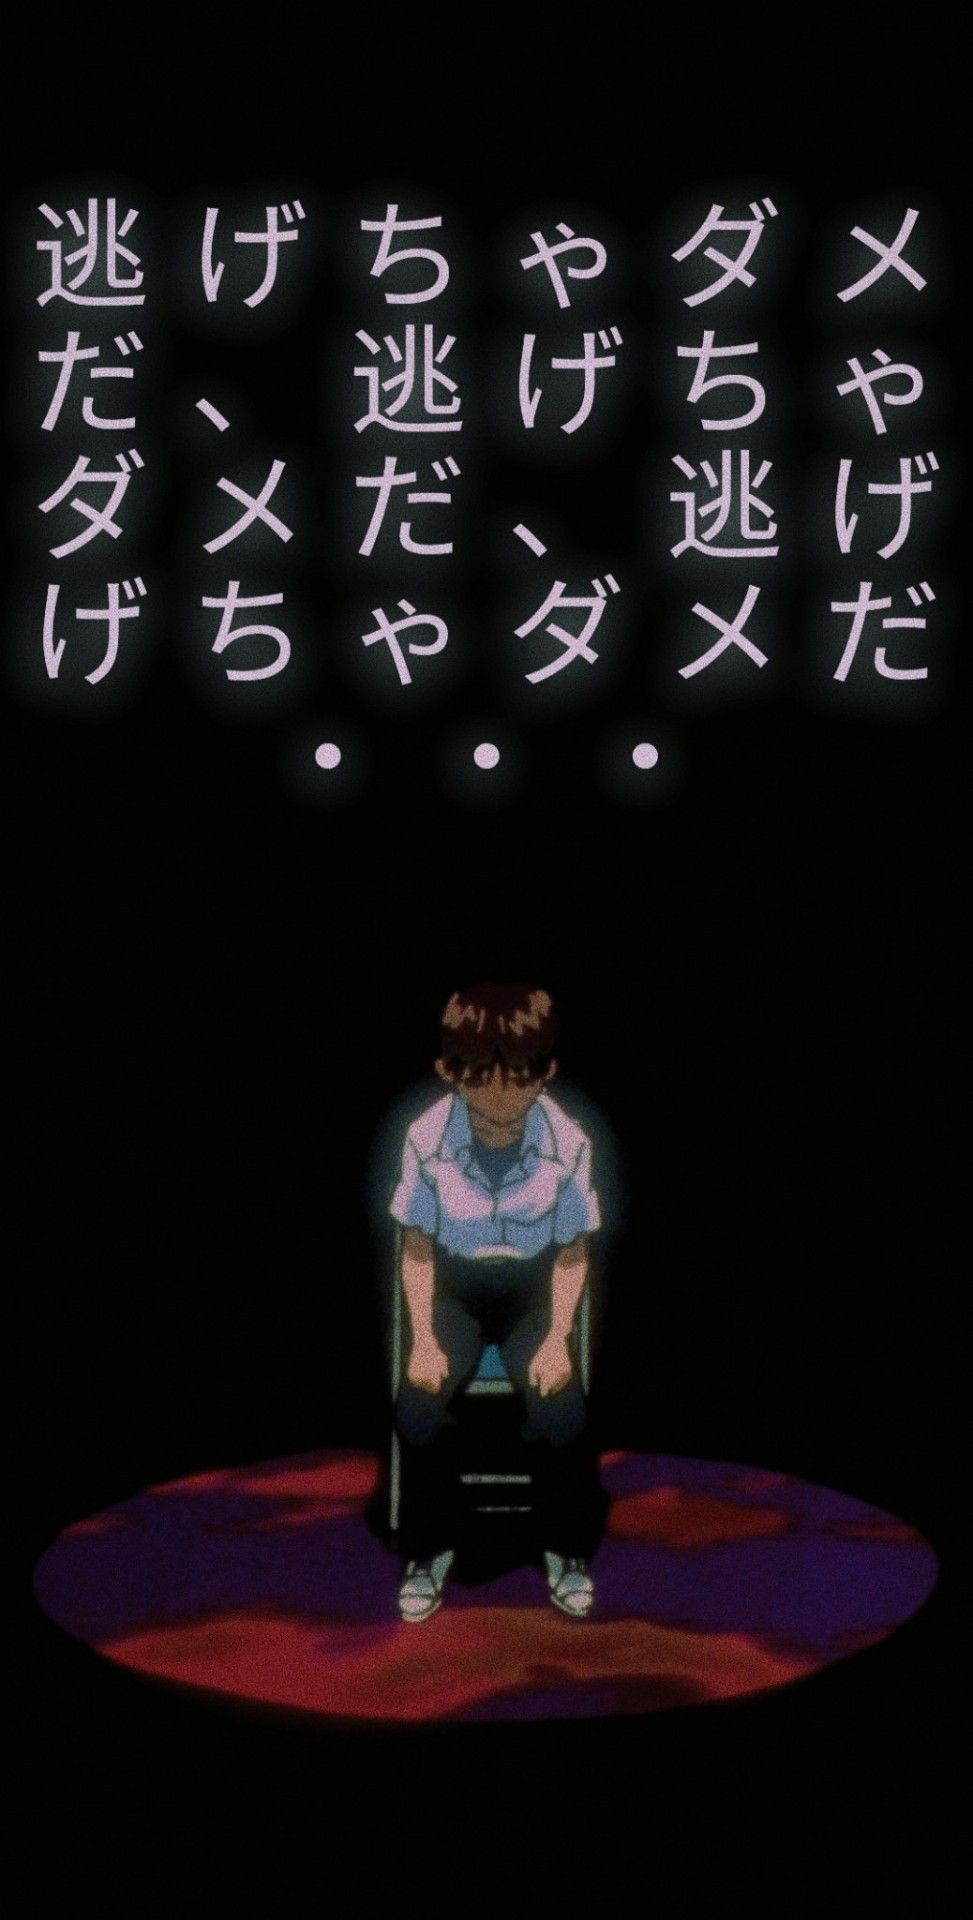 A man sitting on the ground with chinese writing - 90s anime